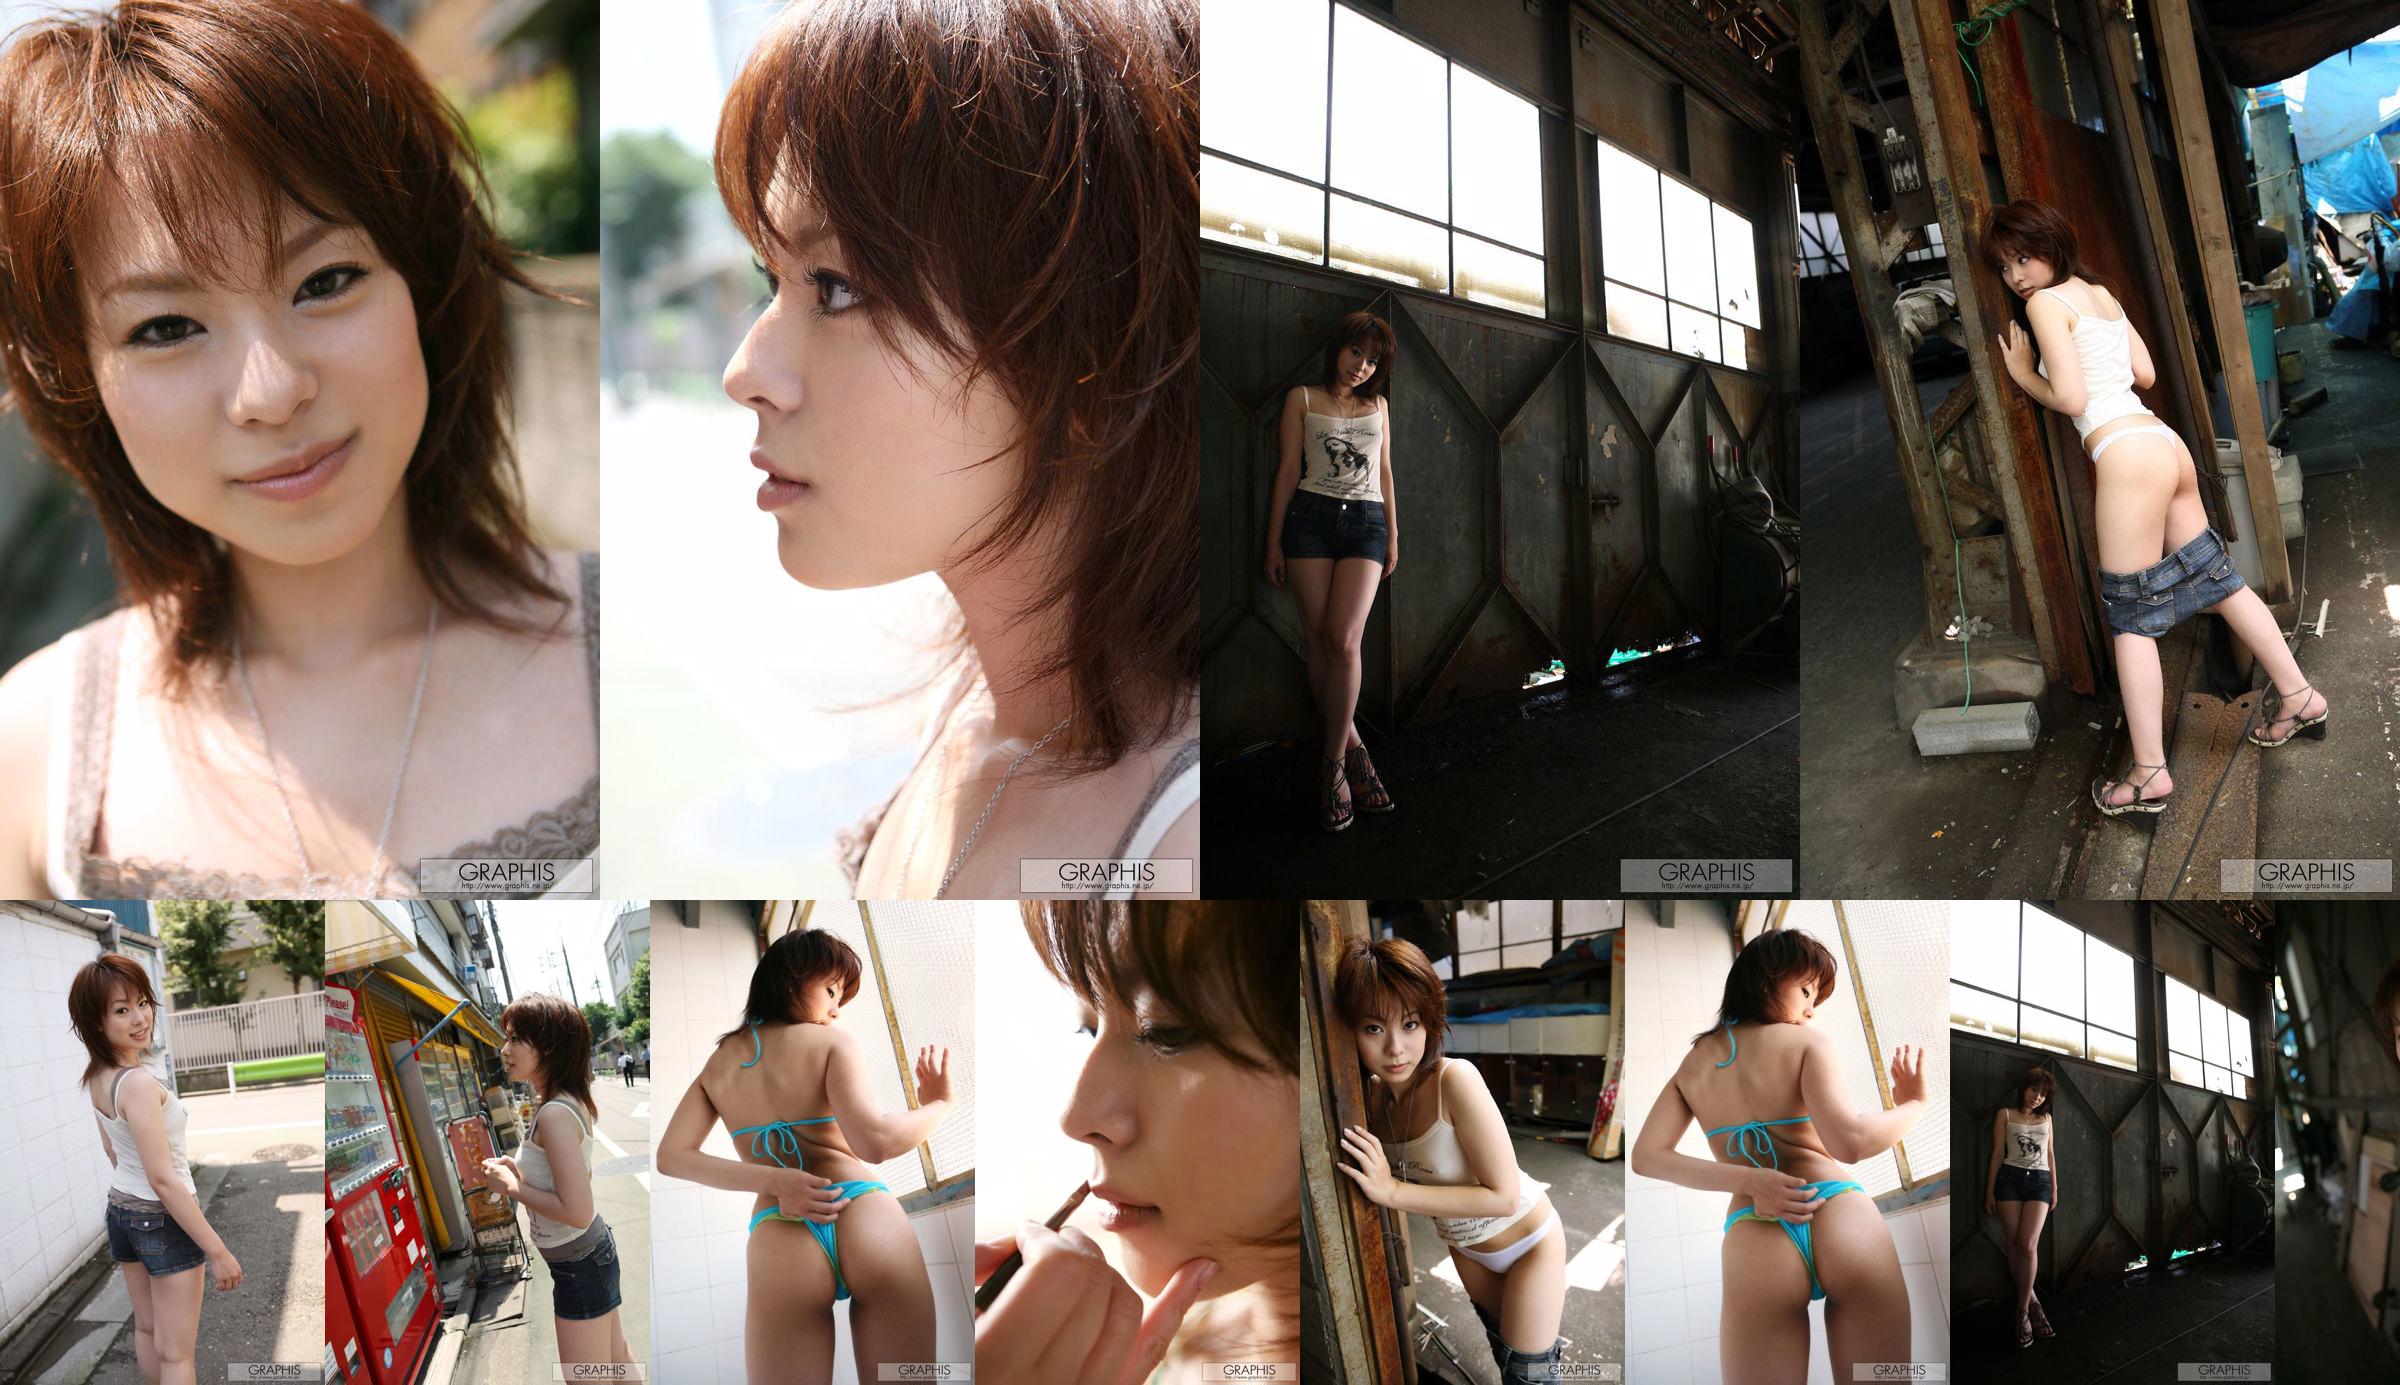 Mina Manabe 真锅美奈 [Graphis] First Gravure 初脱ぎ娘 No.16aa77 第1页